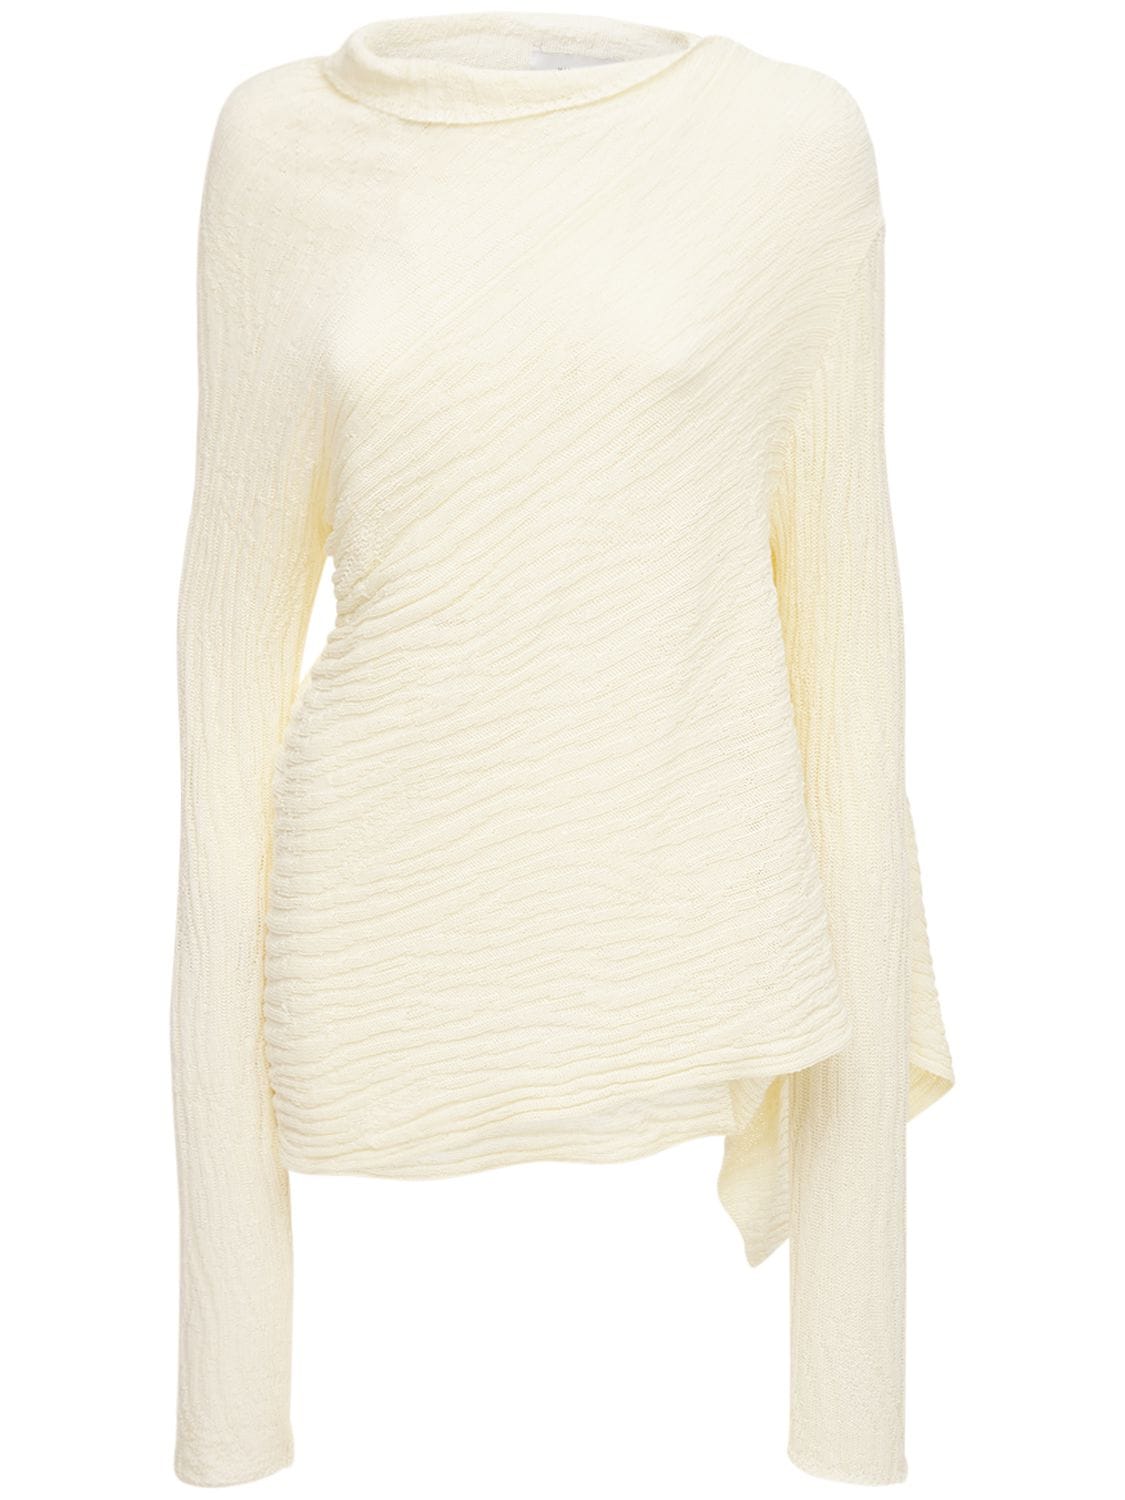 Marques'Almeida - Recycled cotton knit turtleneck sweater - Beige ...